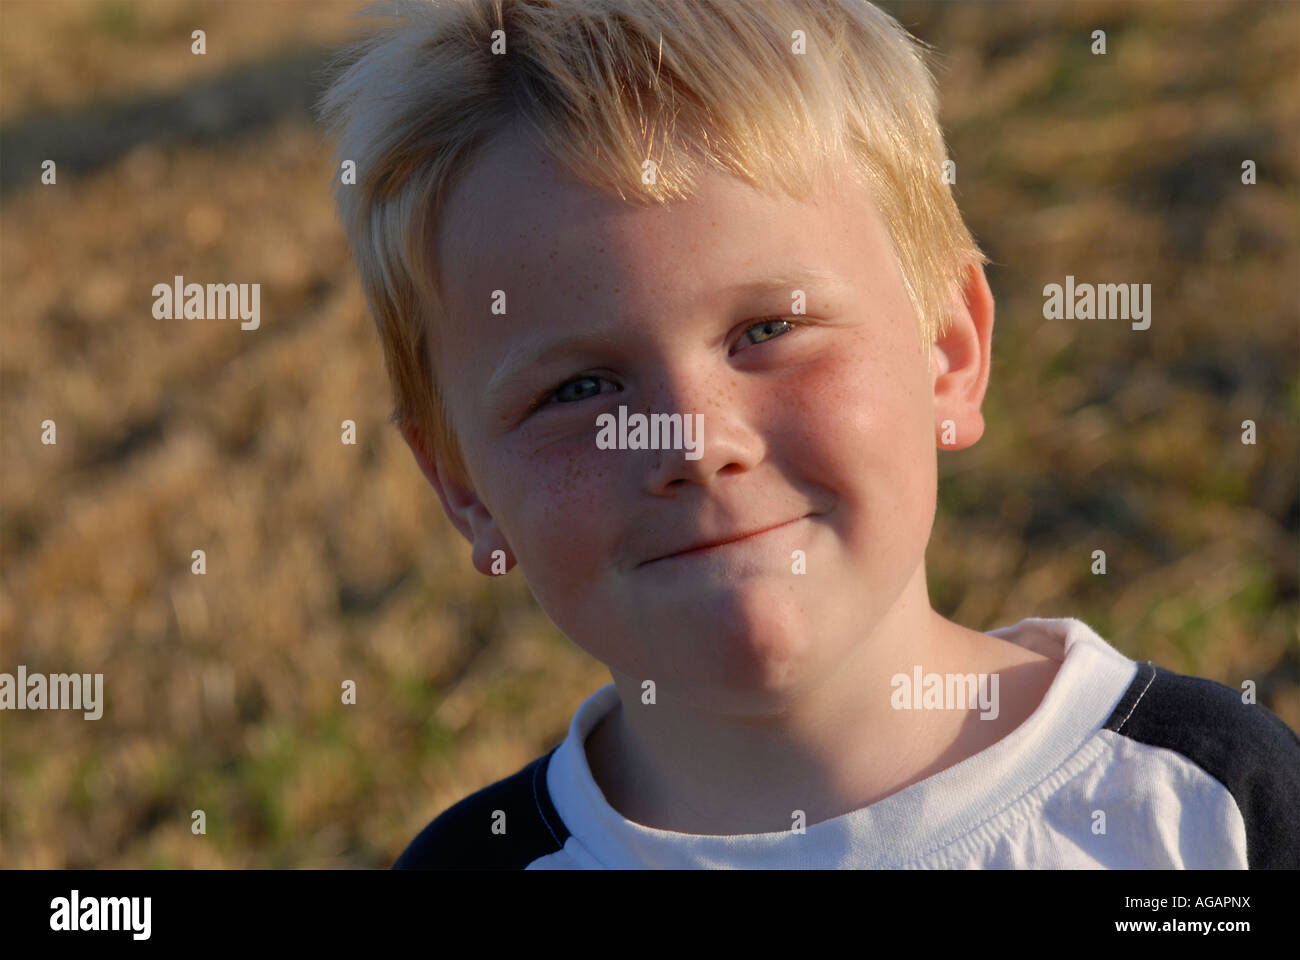 Portrait of a smiling young boy Stock Photo